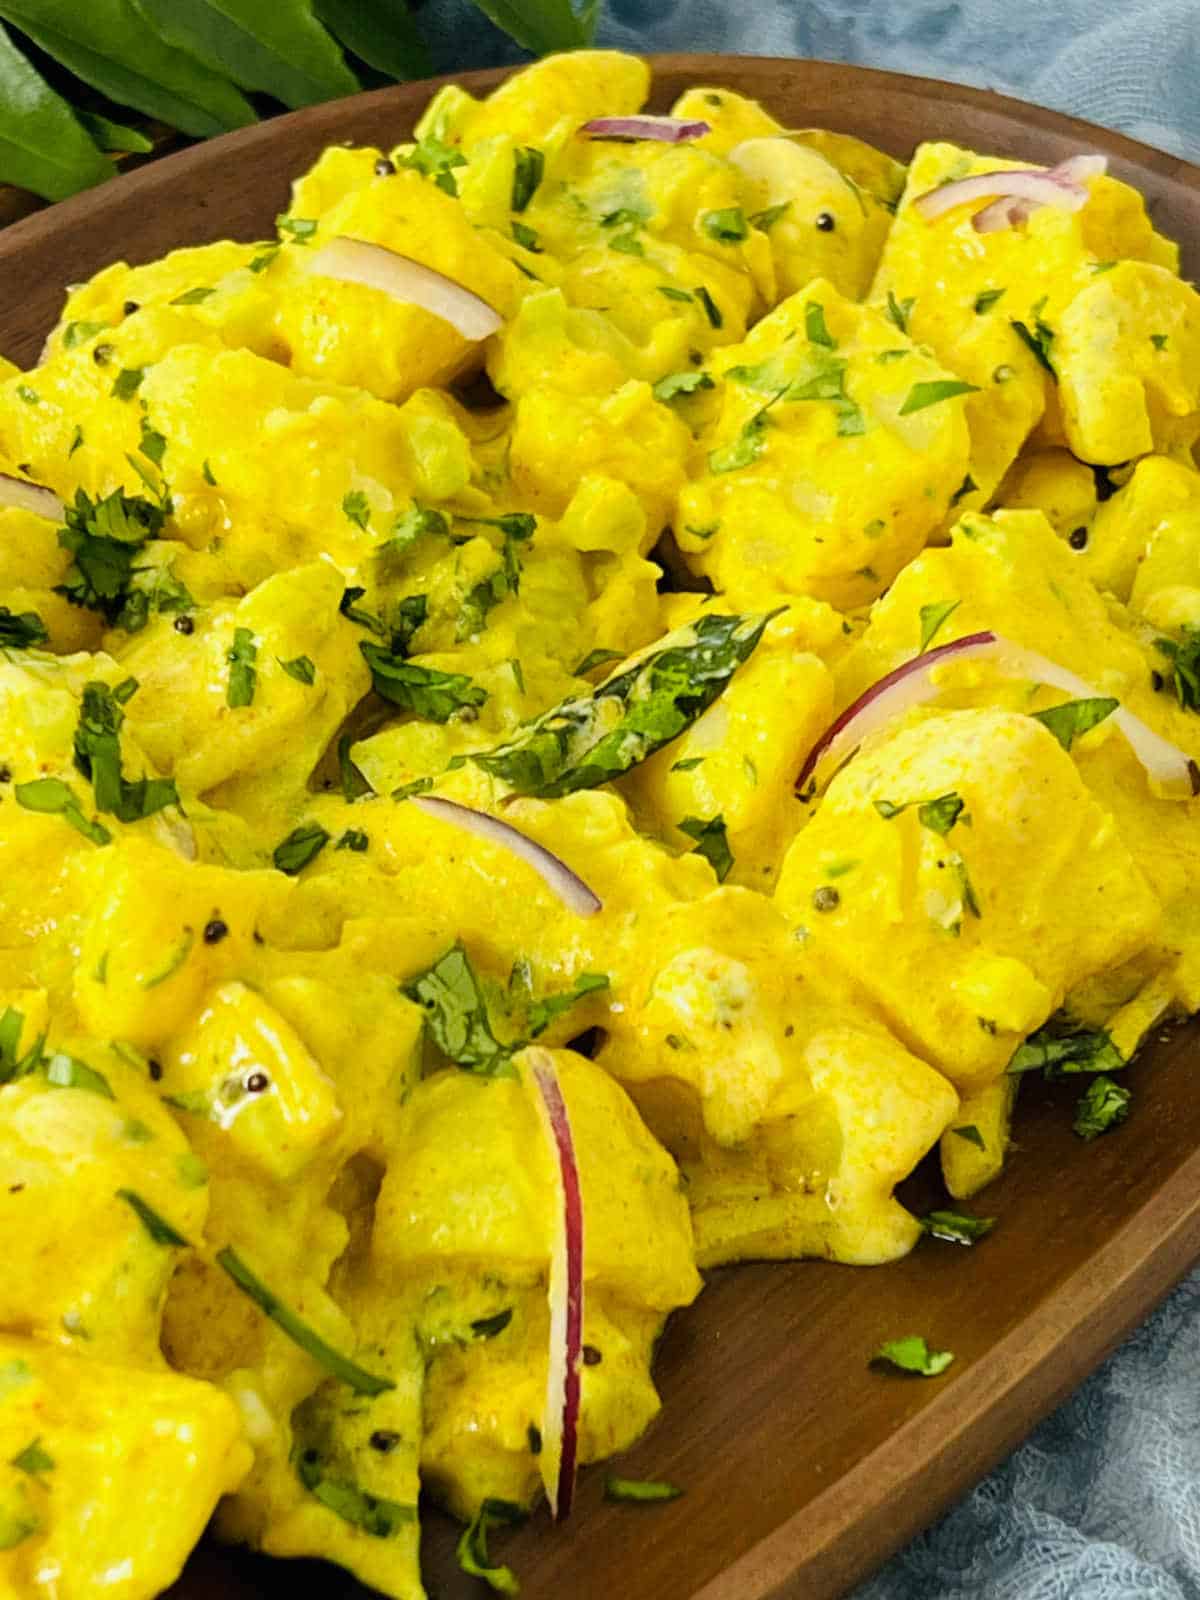 Close-up of curry potato salad to show the textures of potato and dressing.